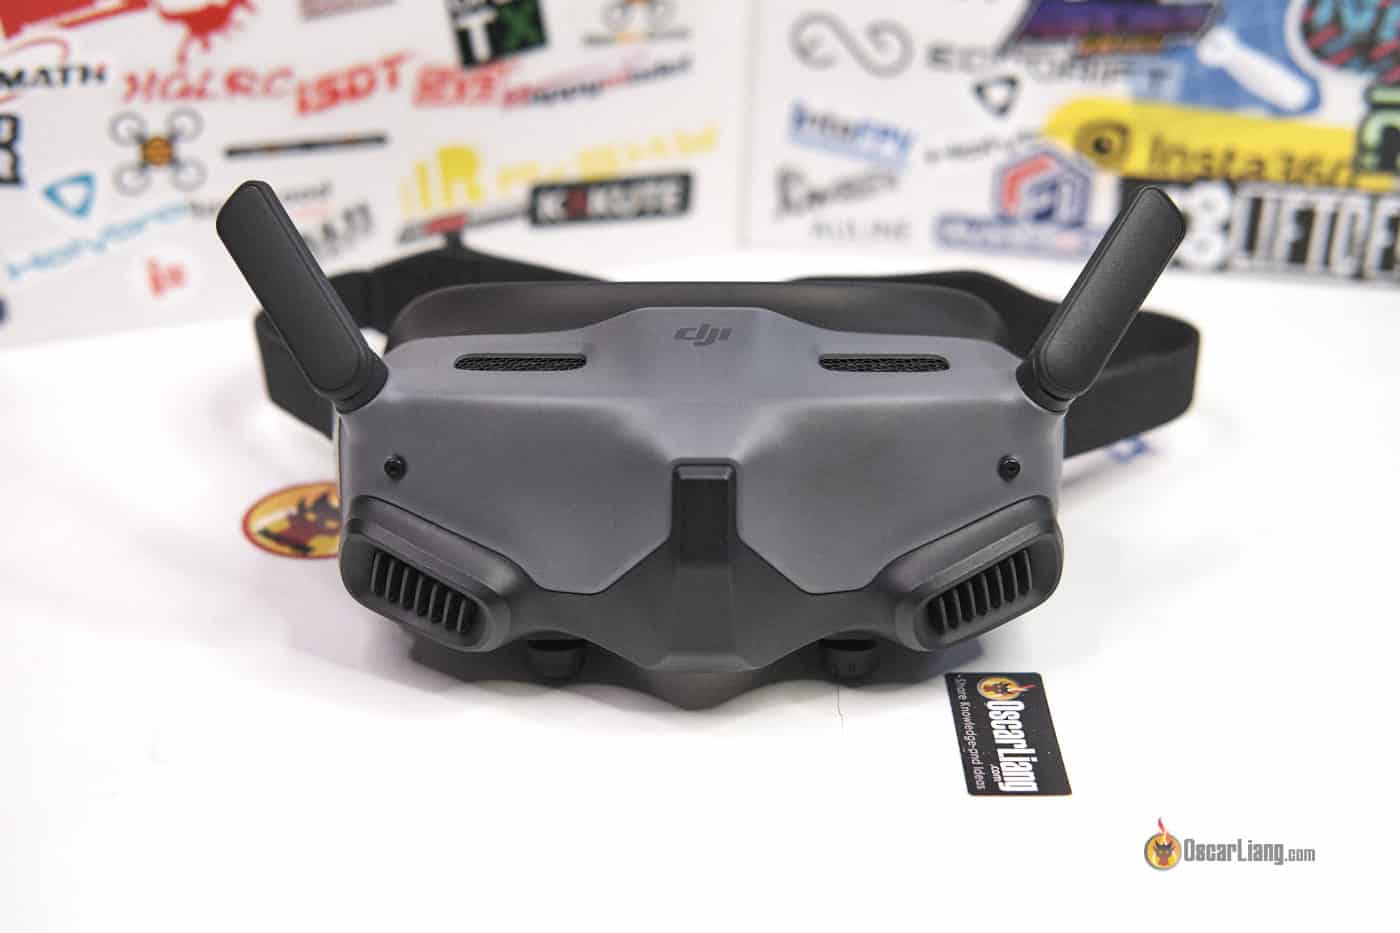 Review: FPV Goggles Straps from Banggood - Actually Good! - Oscar